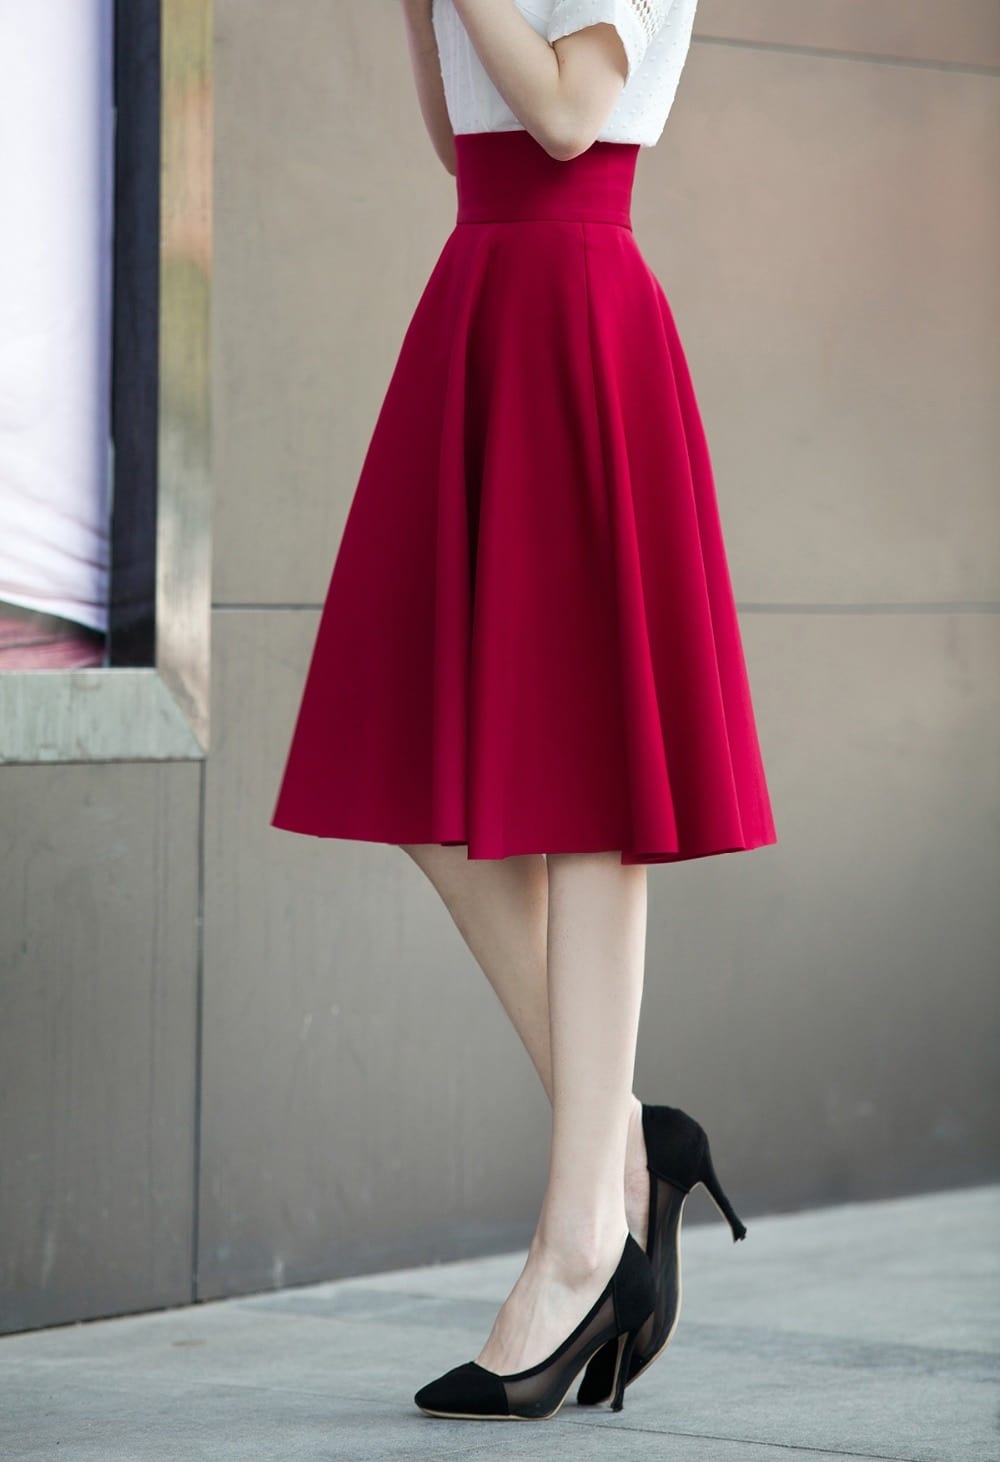 High Waisted Knee Length Bottoms Pleated Skirt in Skirts